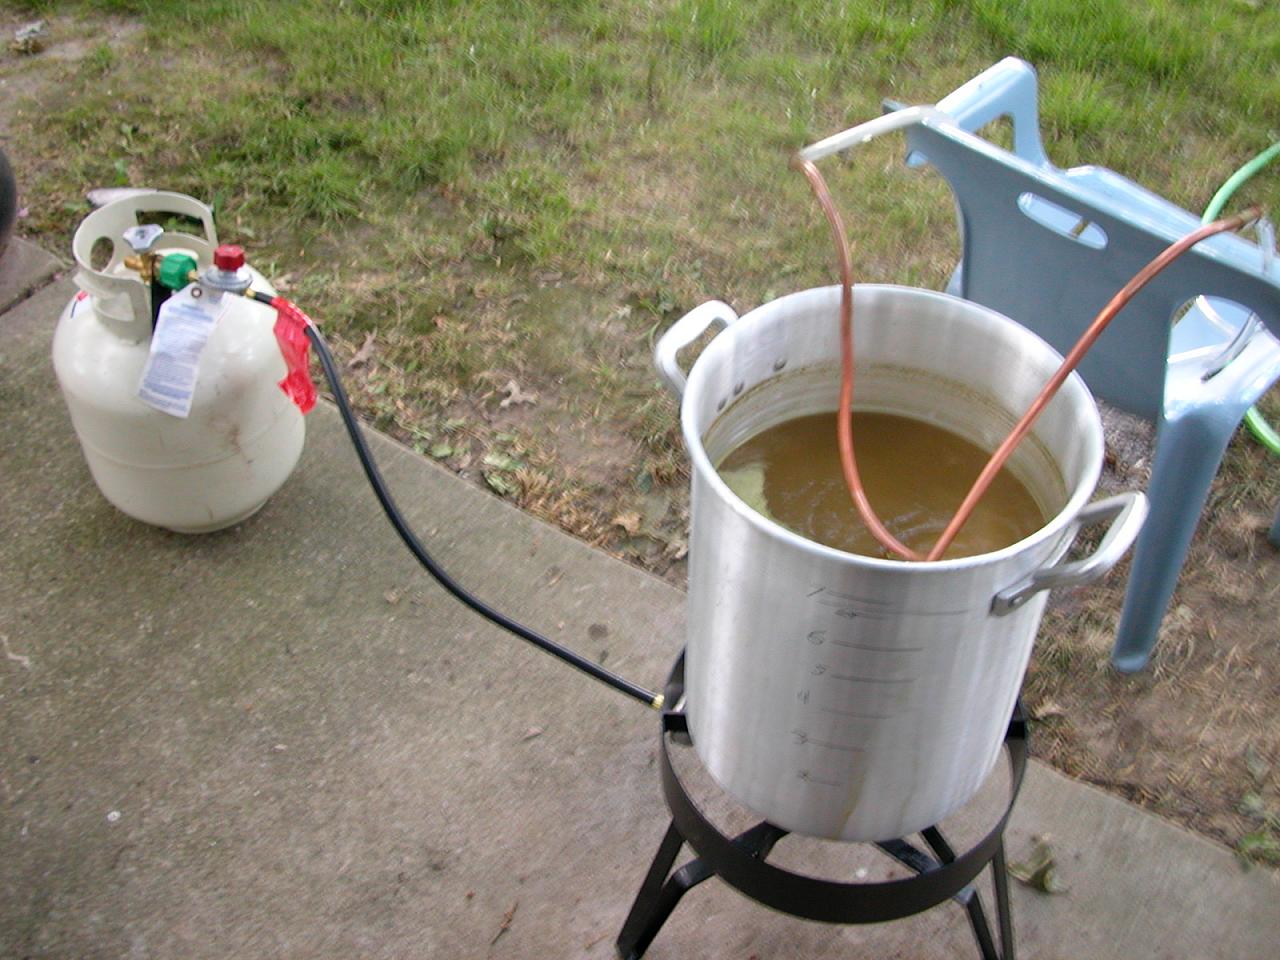 Copper immersion chiller hooked to the garden hose to cool the wort quickly.